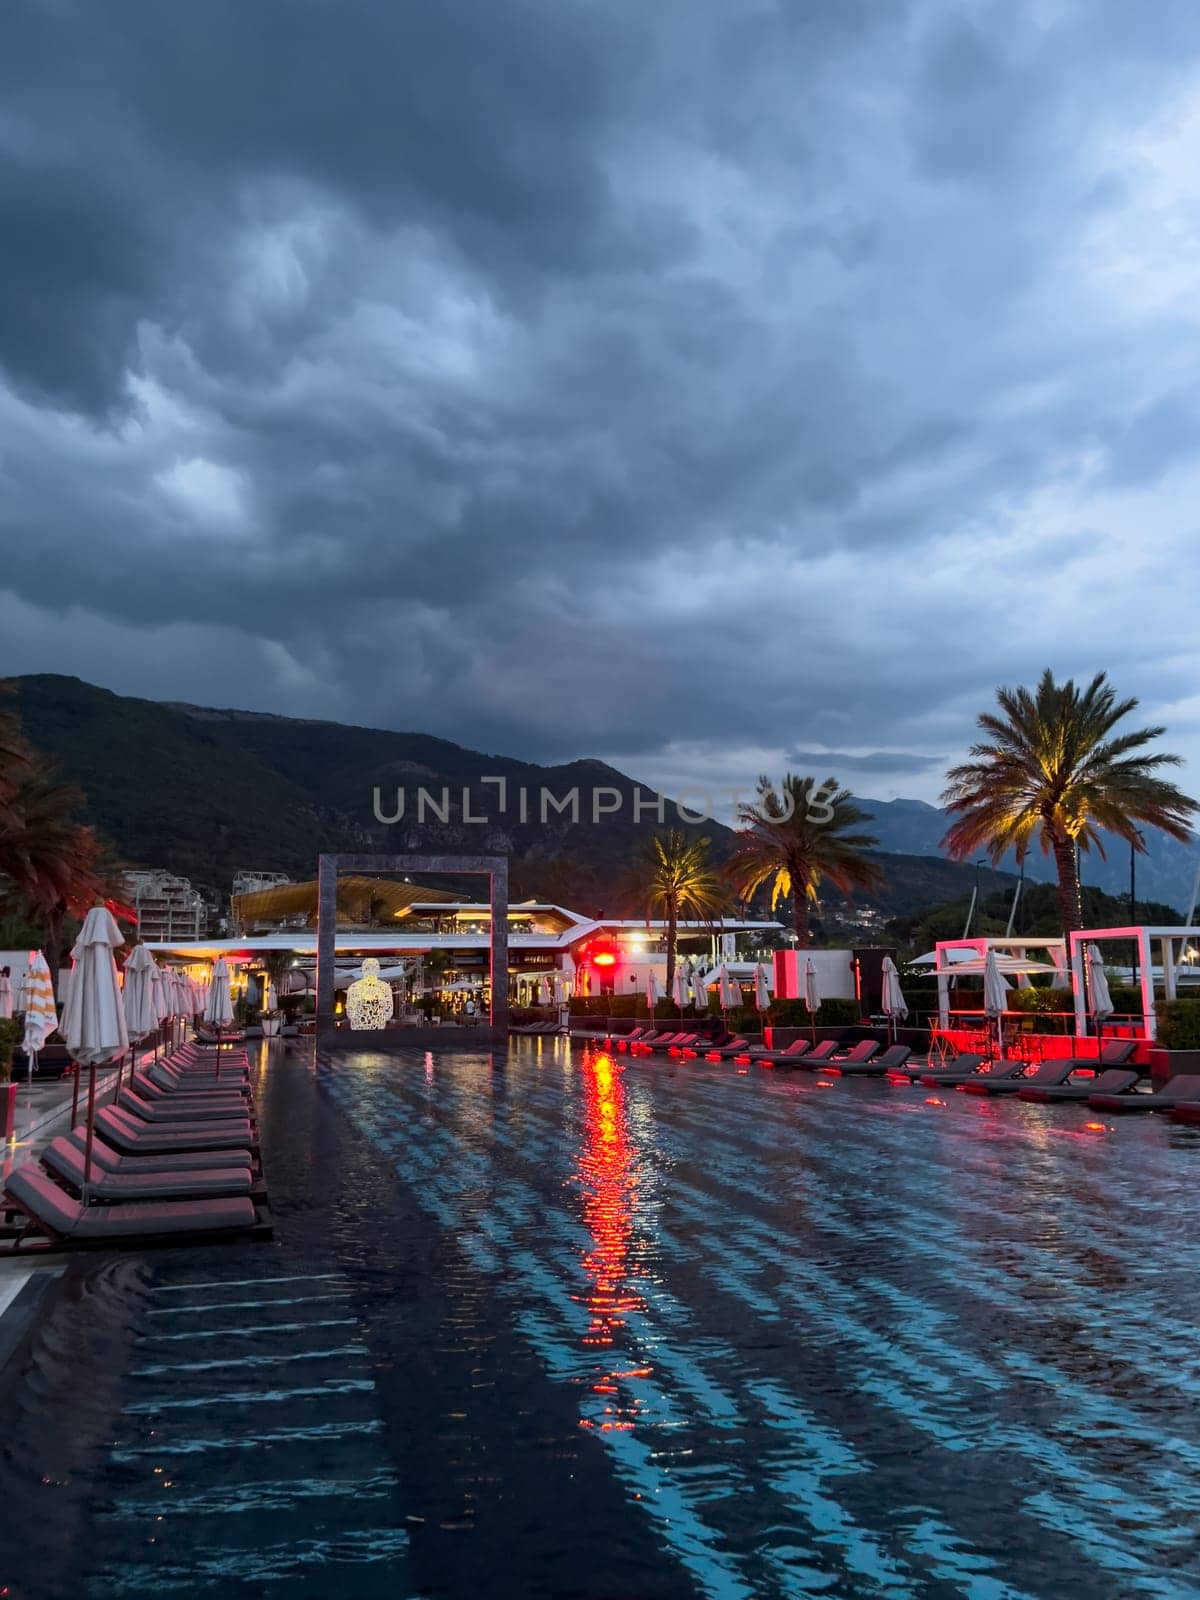 Sun loungers with folded umbrellas stand near the illuminated pool at dusk by Nadtochiy